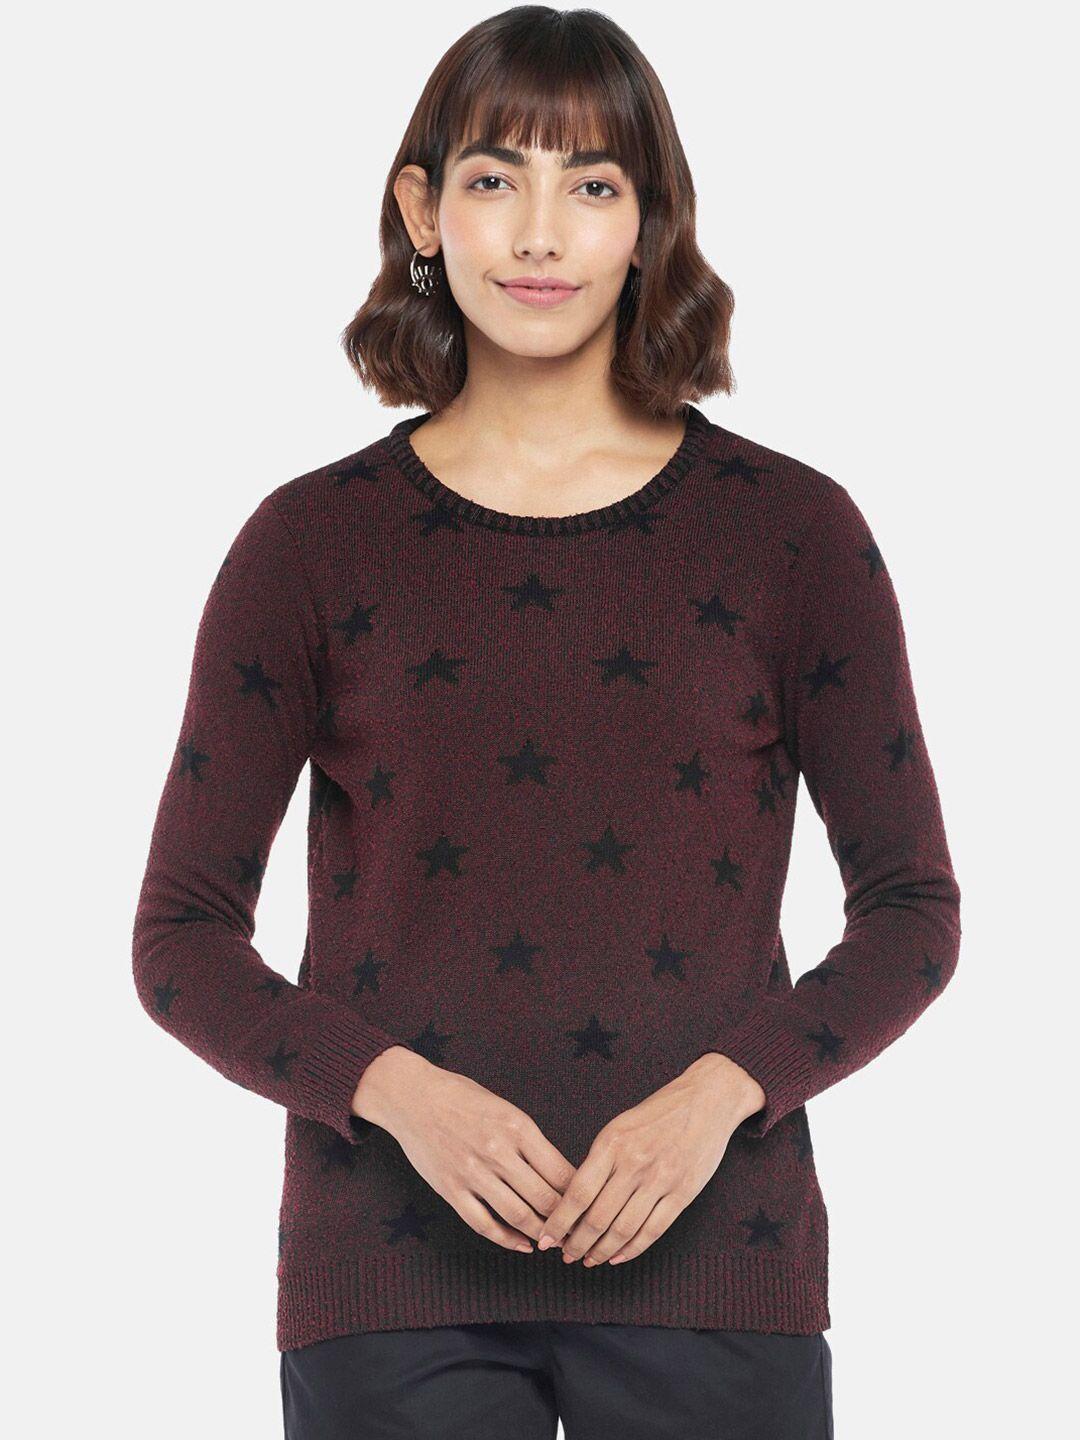 honey-by-pantaloons-women-brown-&-black-printed-pullover-with-fuzzy-detail